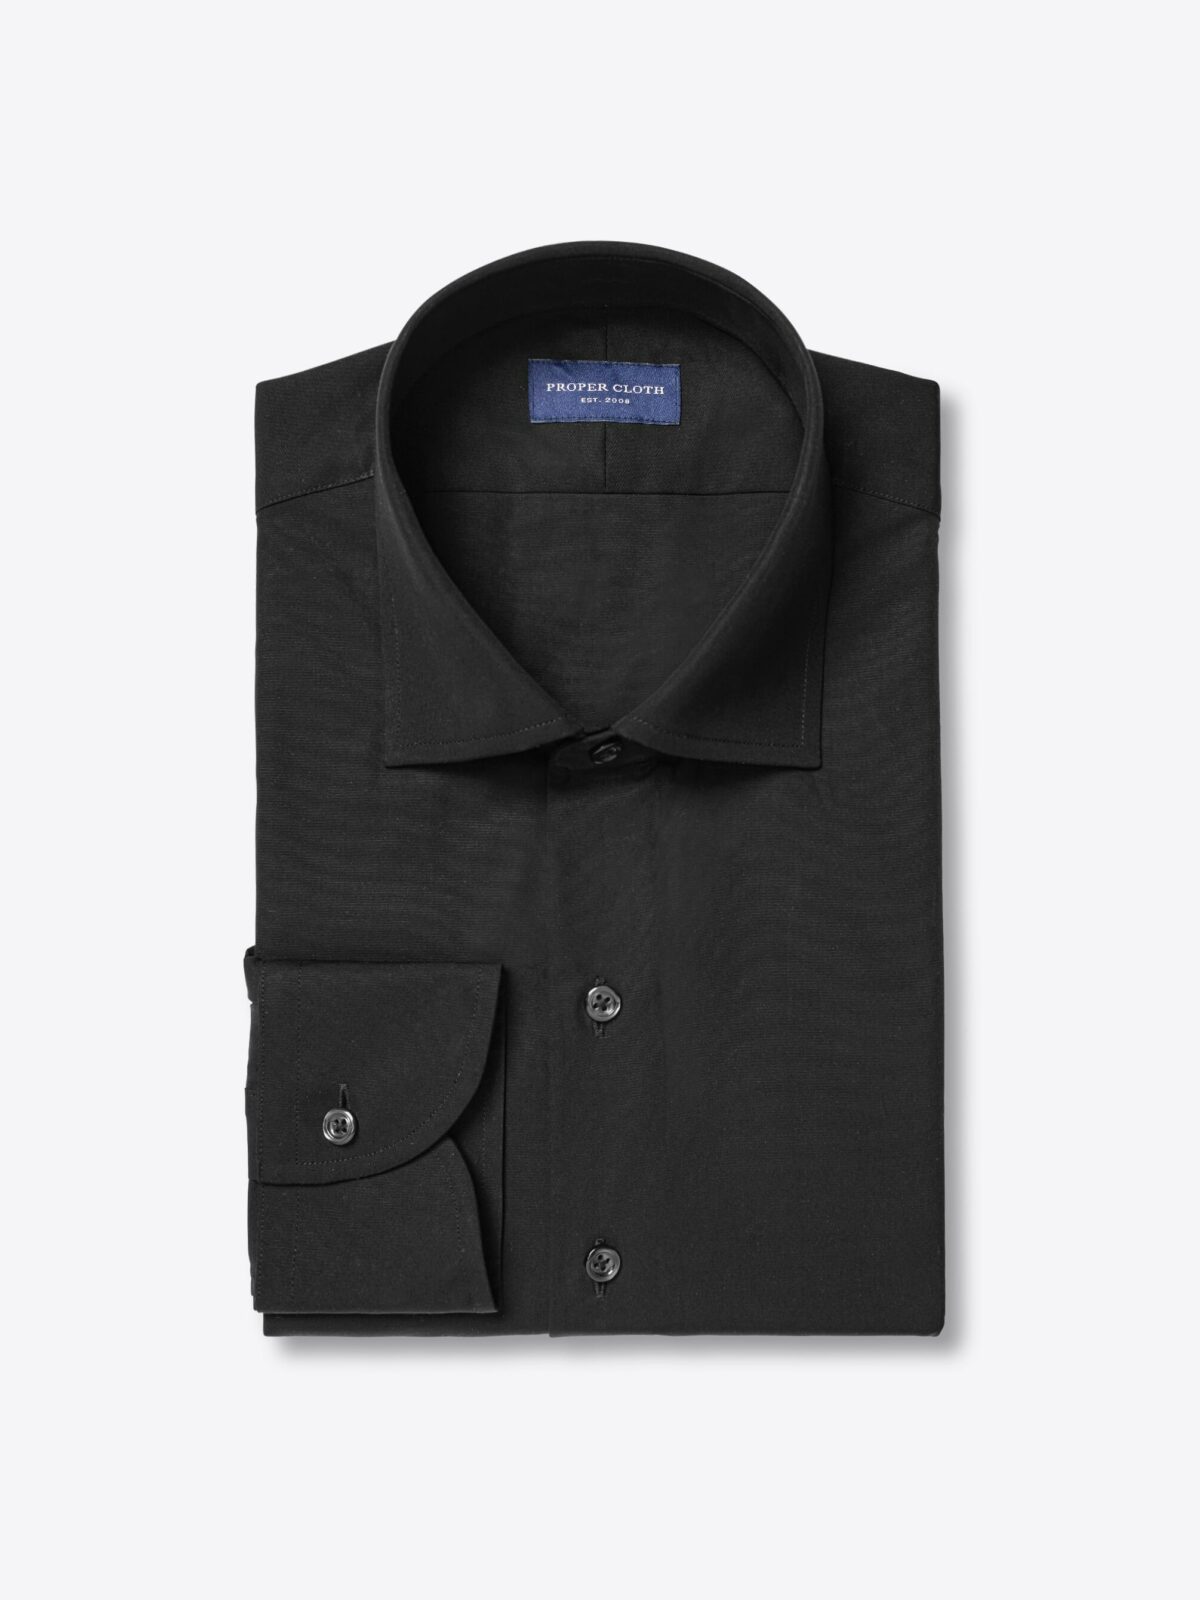 Miles 120s Black Broadcloth Tailor Made Shirt Shirt by Proper Cloth